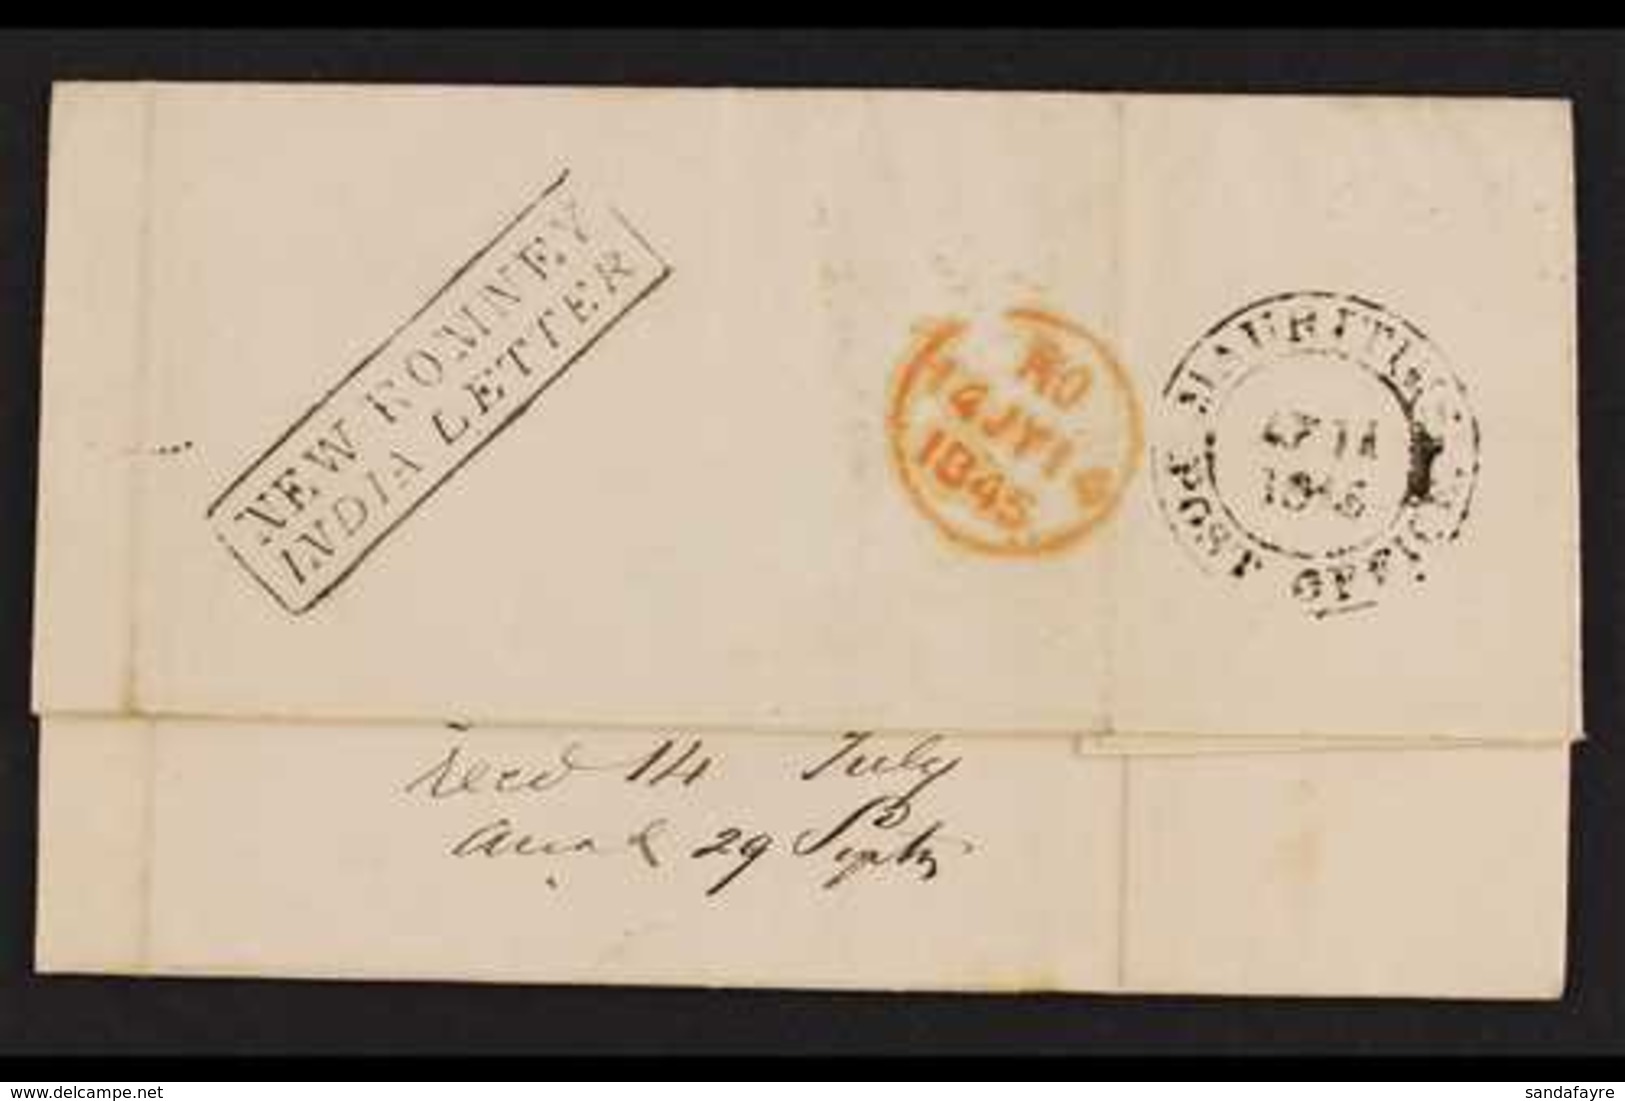 1845  (April) Entire Letter "Pr. John King" To Huth In London, Showing Black MAURITIUS POST OFFICE Cds, And Very Fine Bo - Maurice (...-1967)